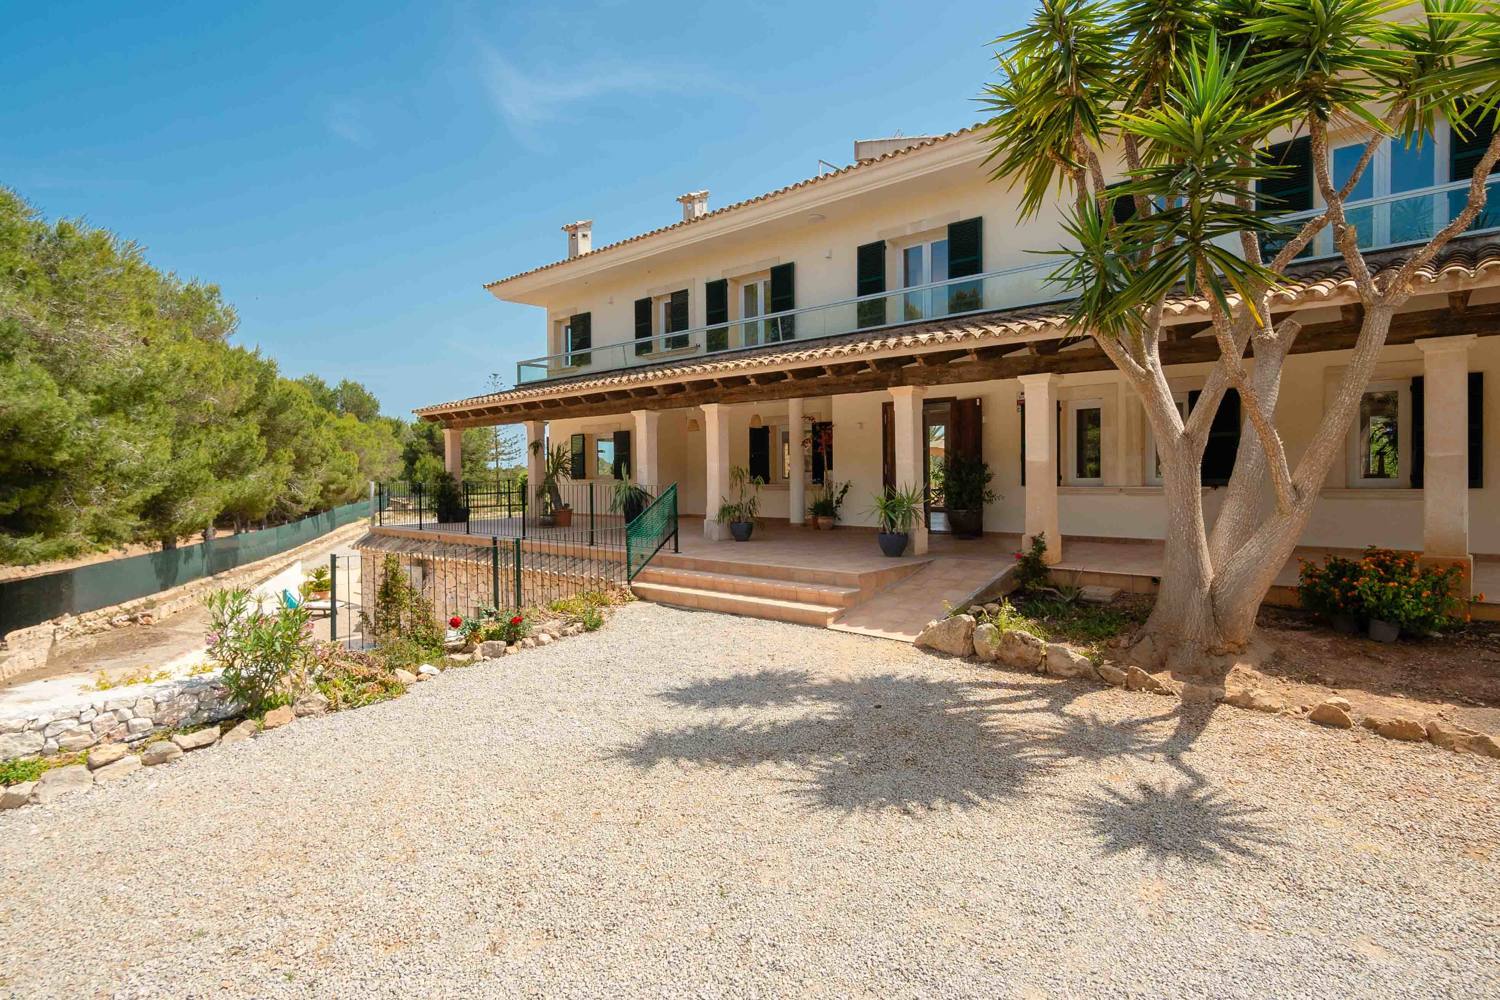 Escape to a Stunning Holiday Rental Finca near the Mesmerizing Es Trenc Beach!